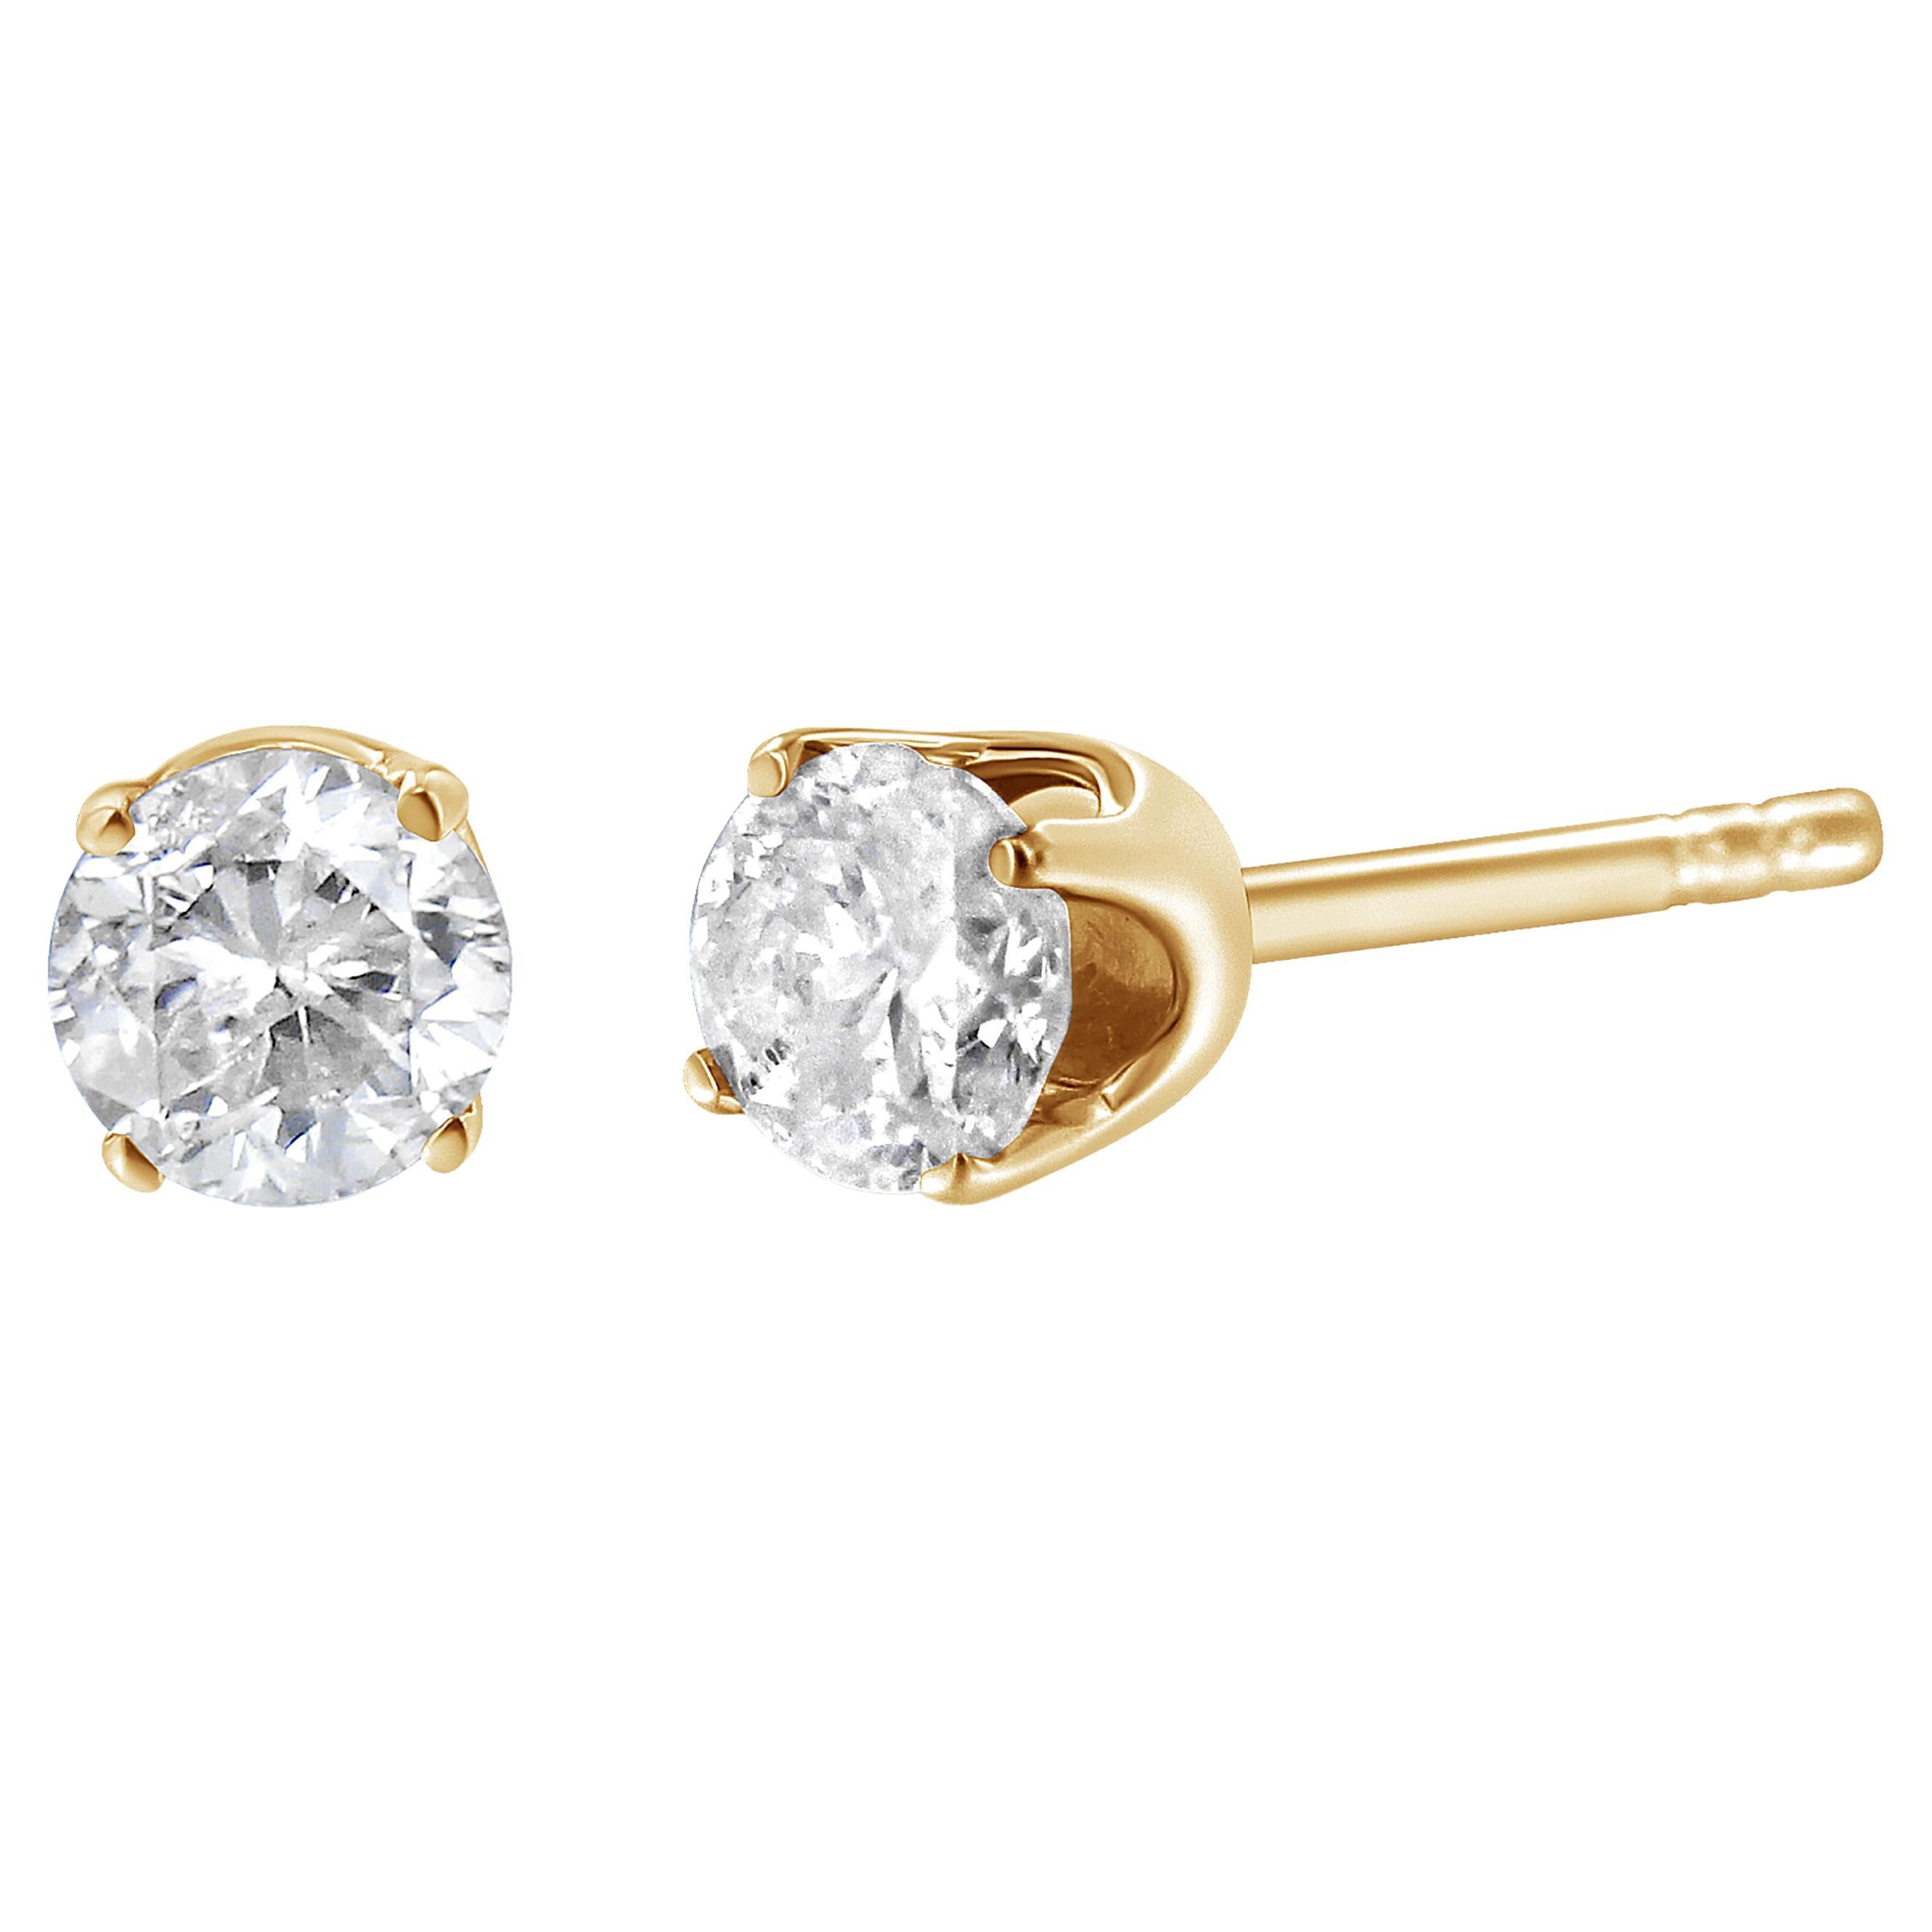 AGS Certified 14K Yellow Gold 1/2 Carat Solitaire Diamond Pushback Stud Earrings